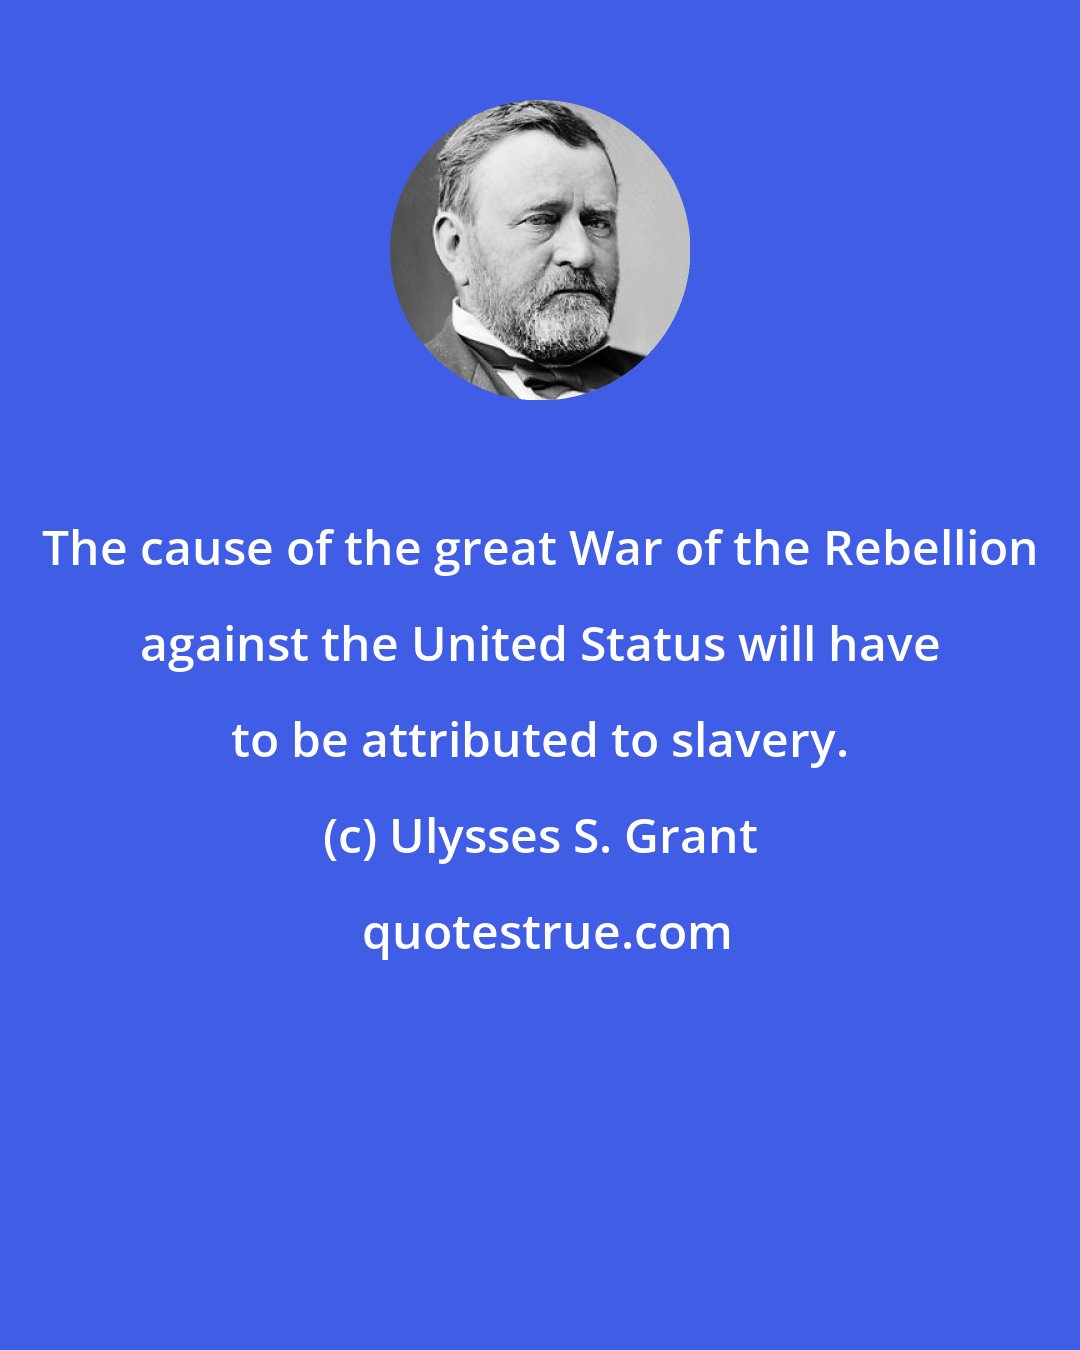 Ulysses S. Grant: The cause of the great War of the Rebellion against the United Status will have to be attributed to slavery.